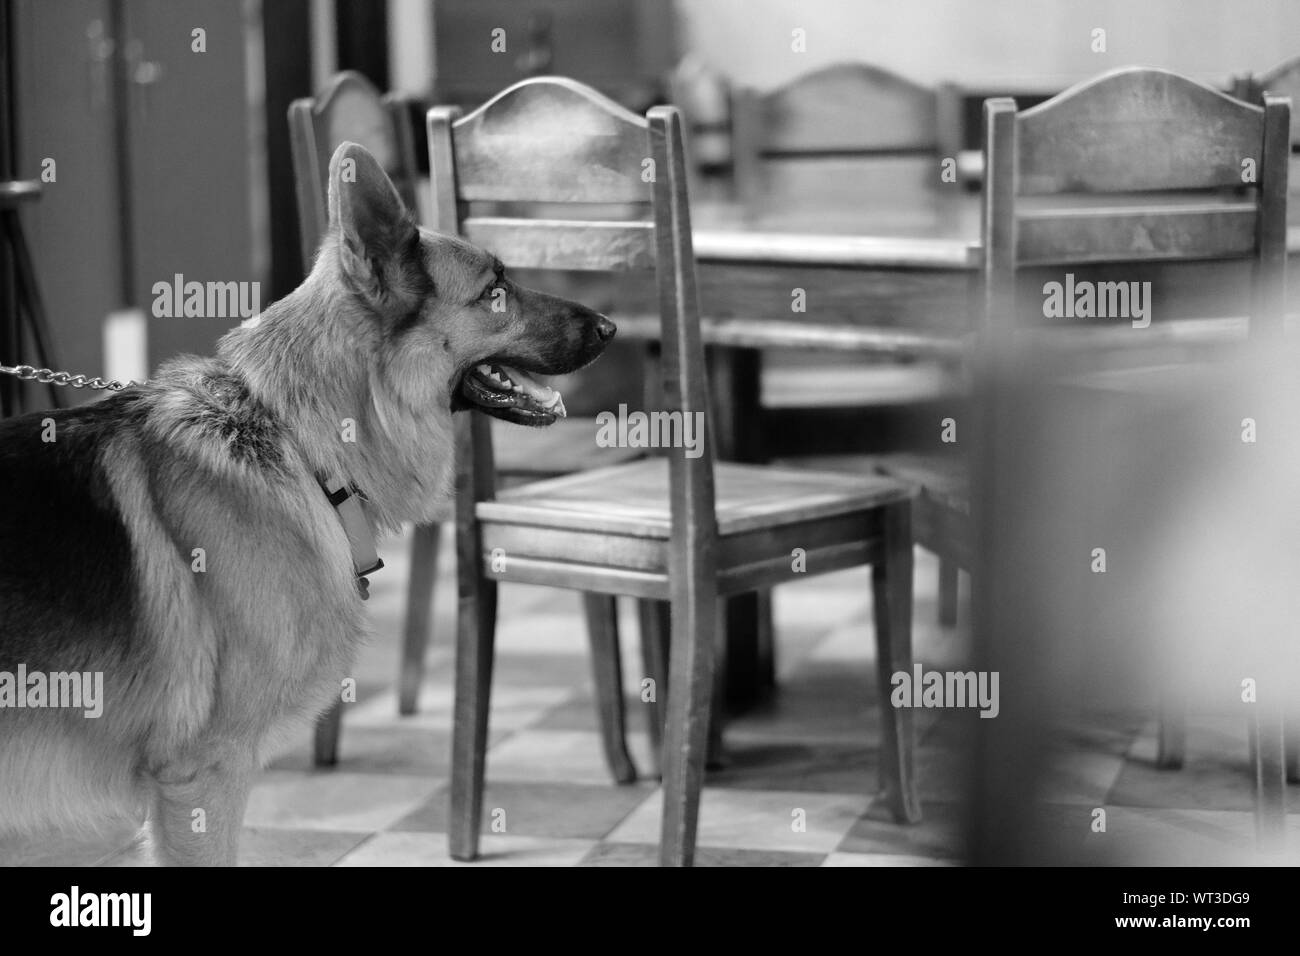 A dog stands in a cafe room amidst wooden furniture Stock Photo